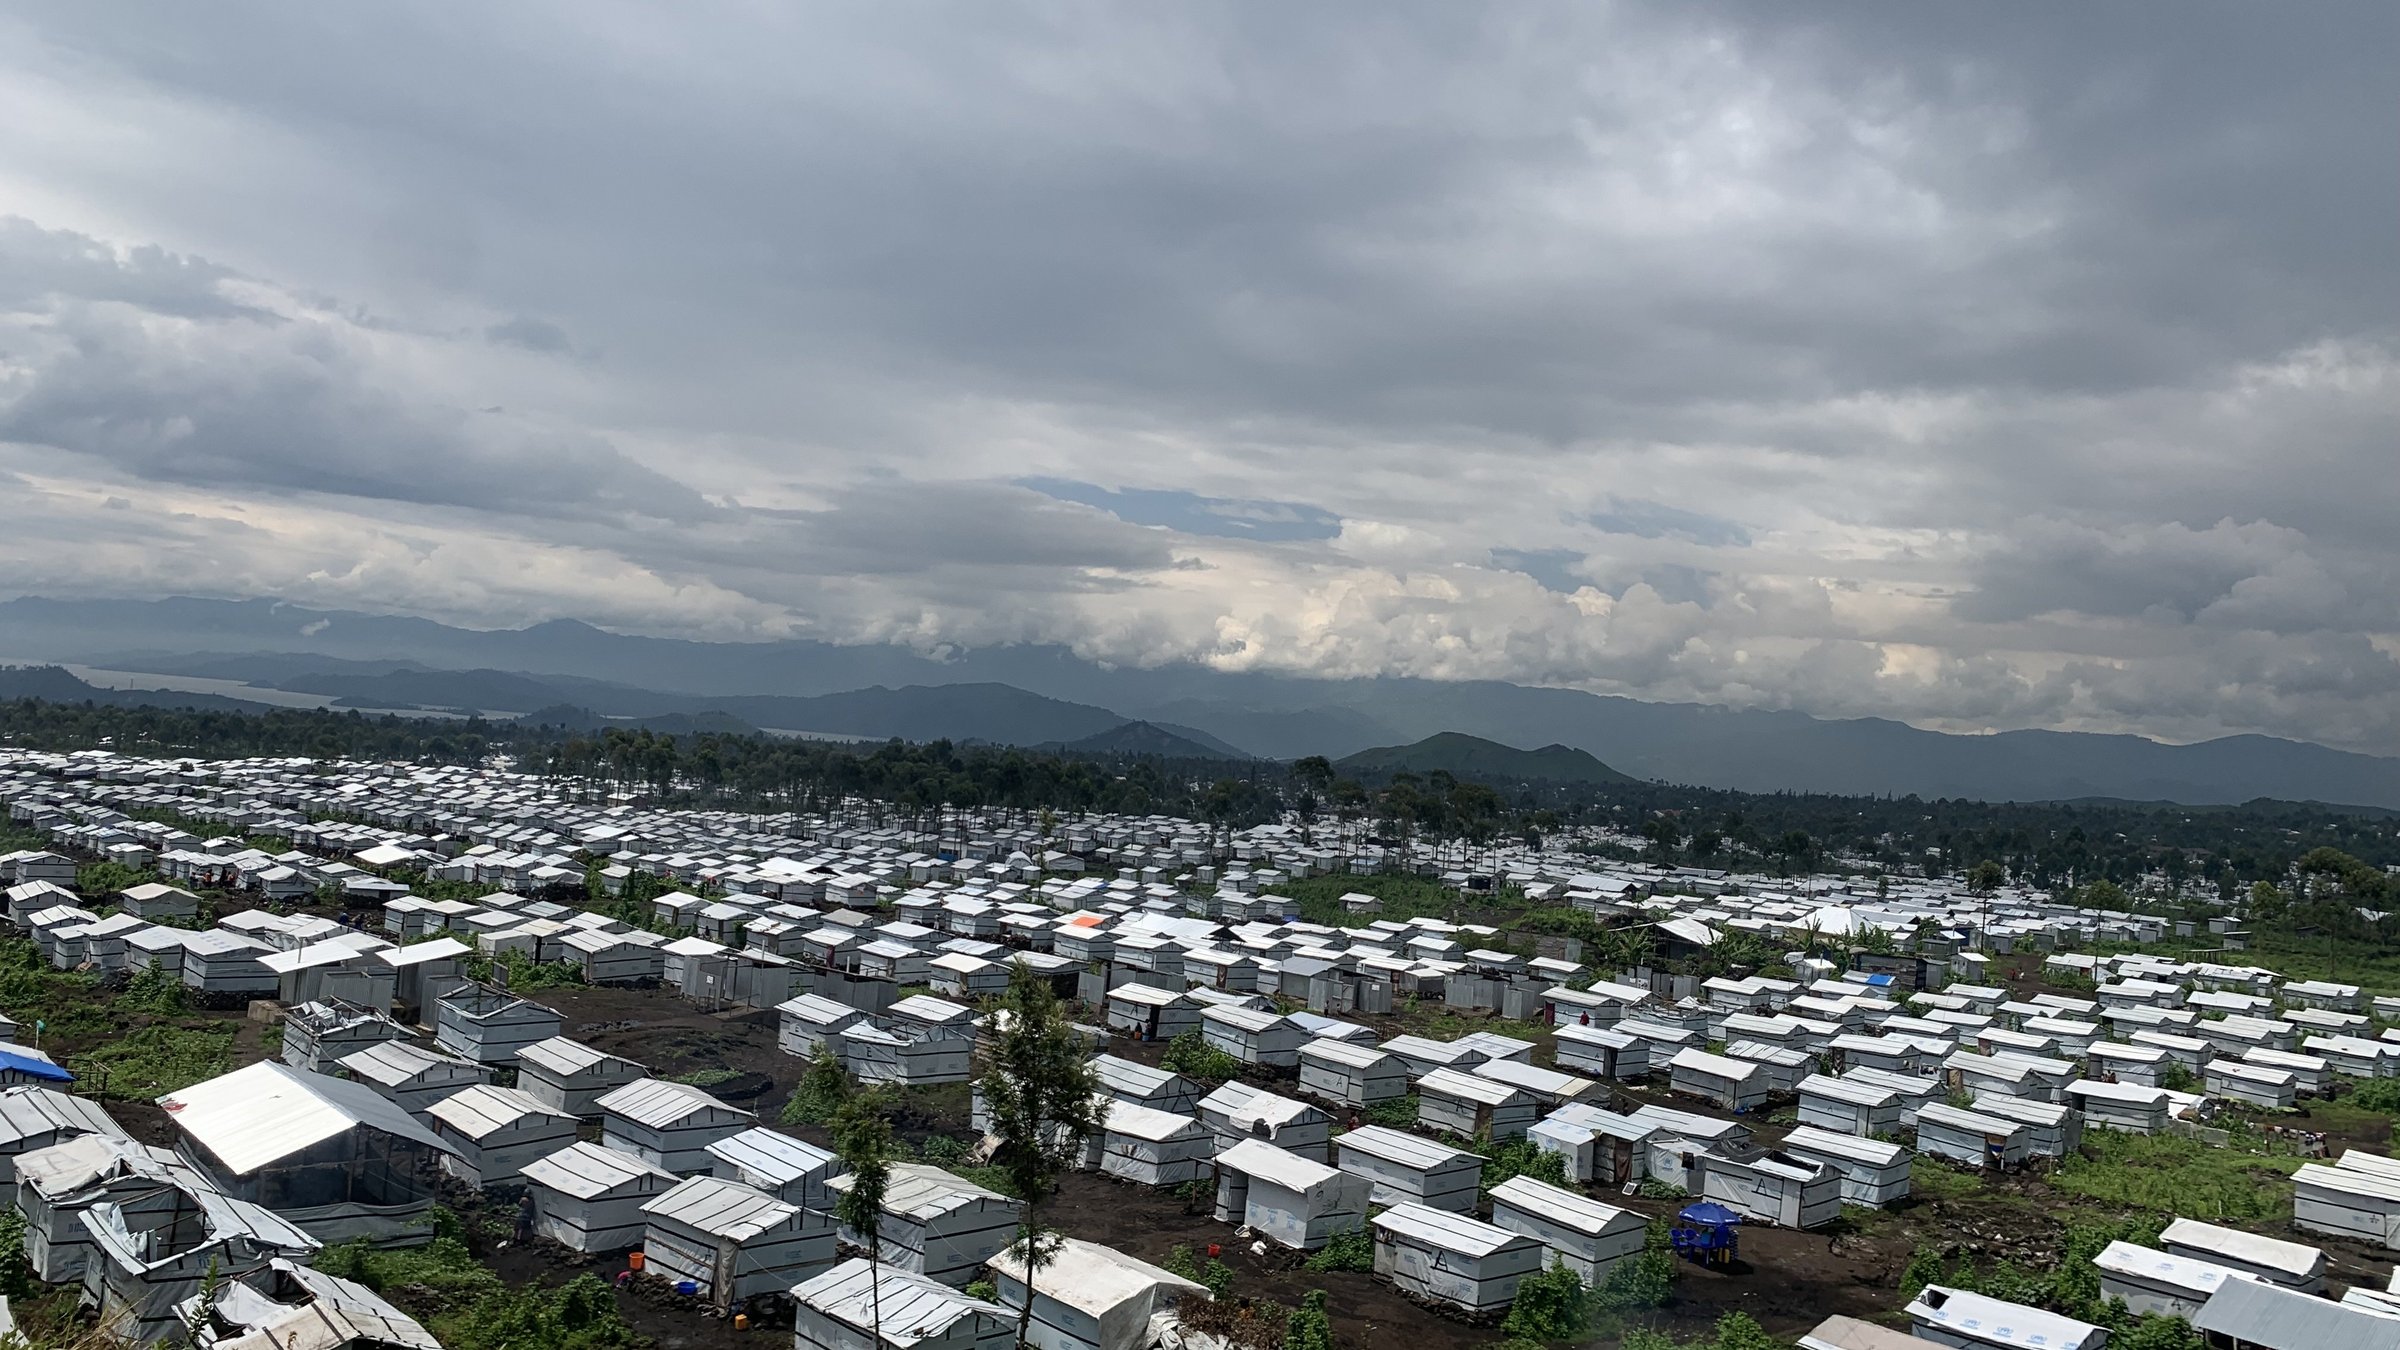 Aerial view of a refugee camp in the Congo